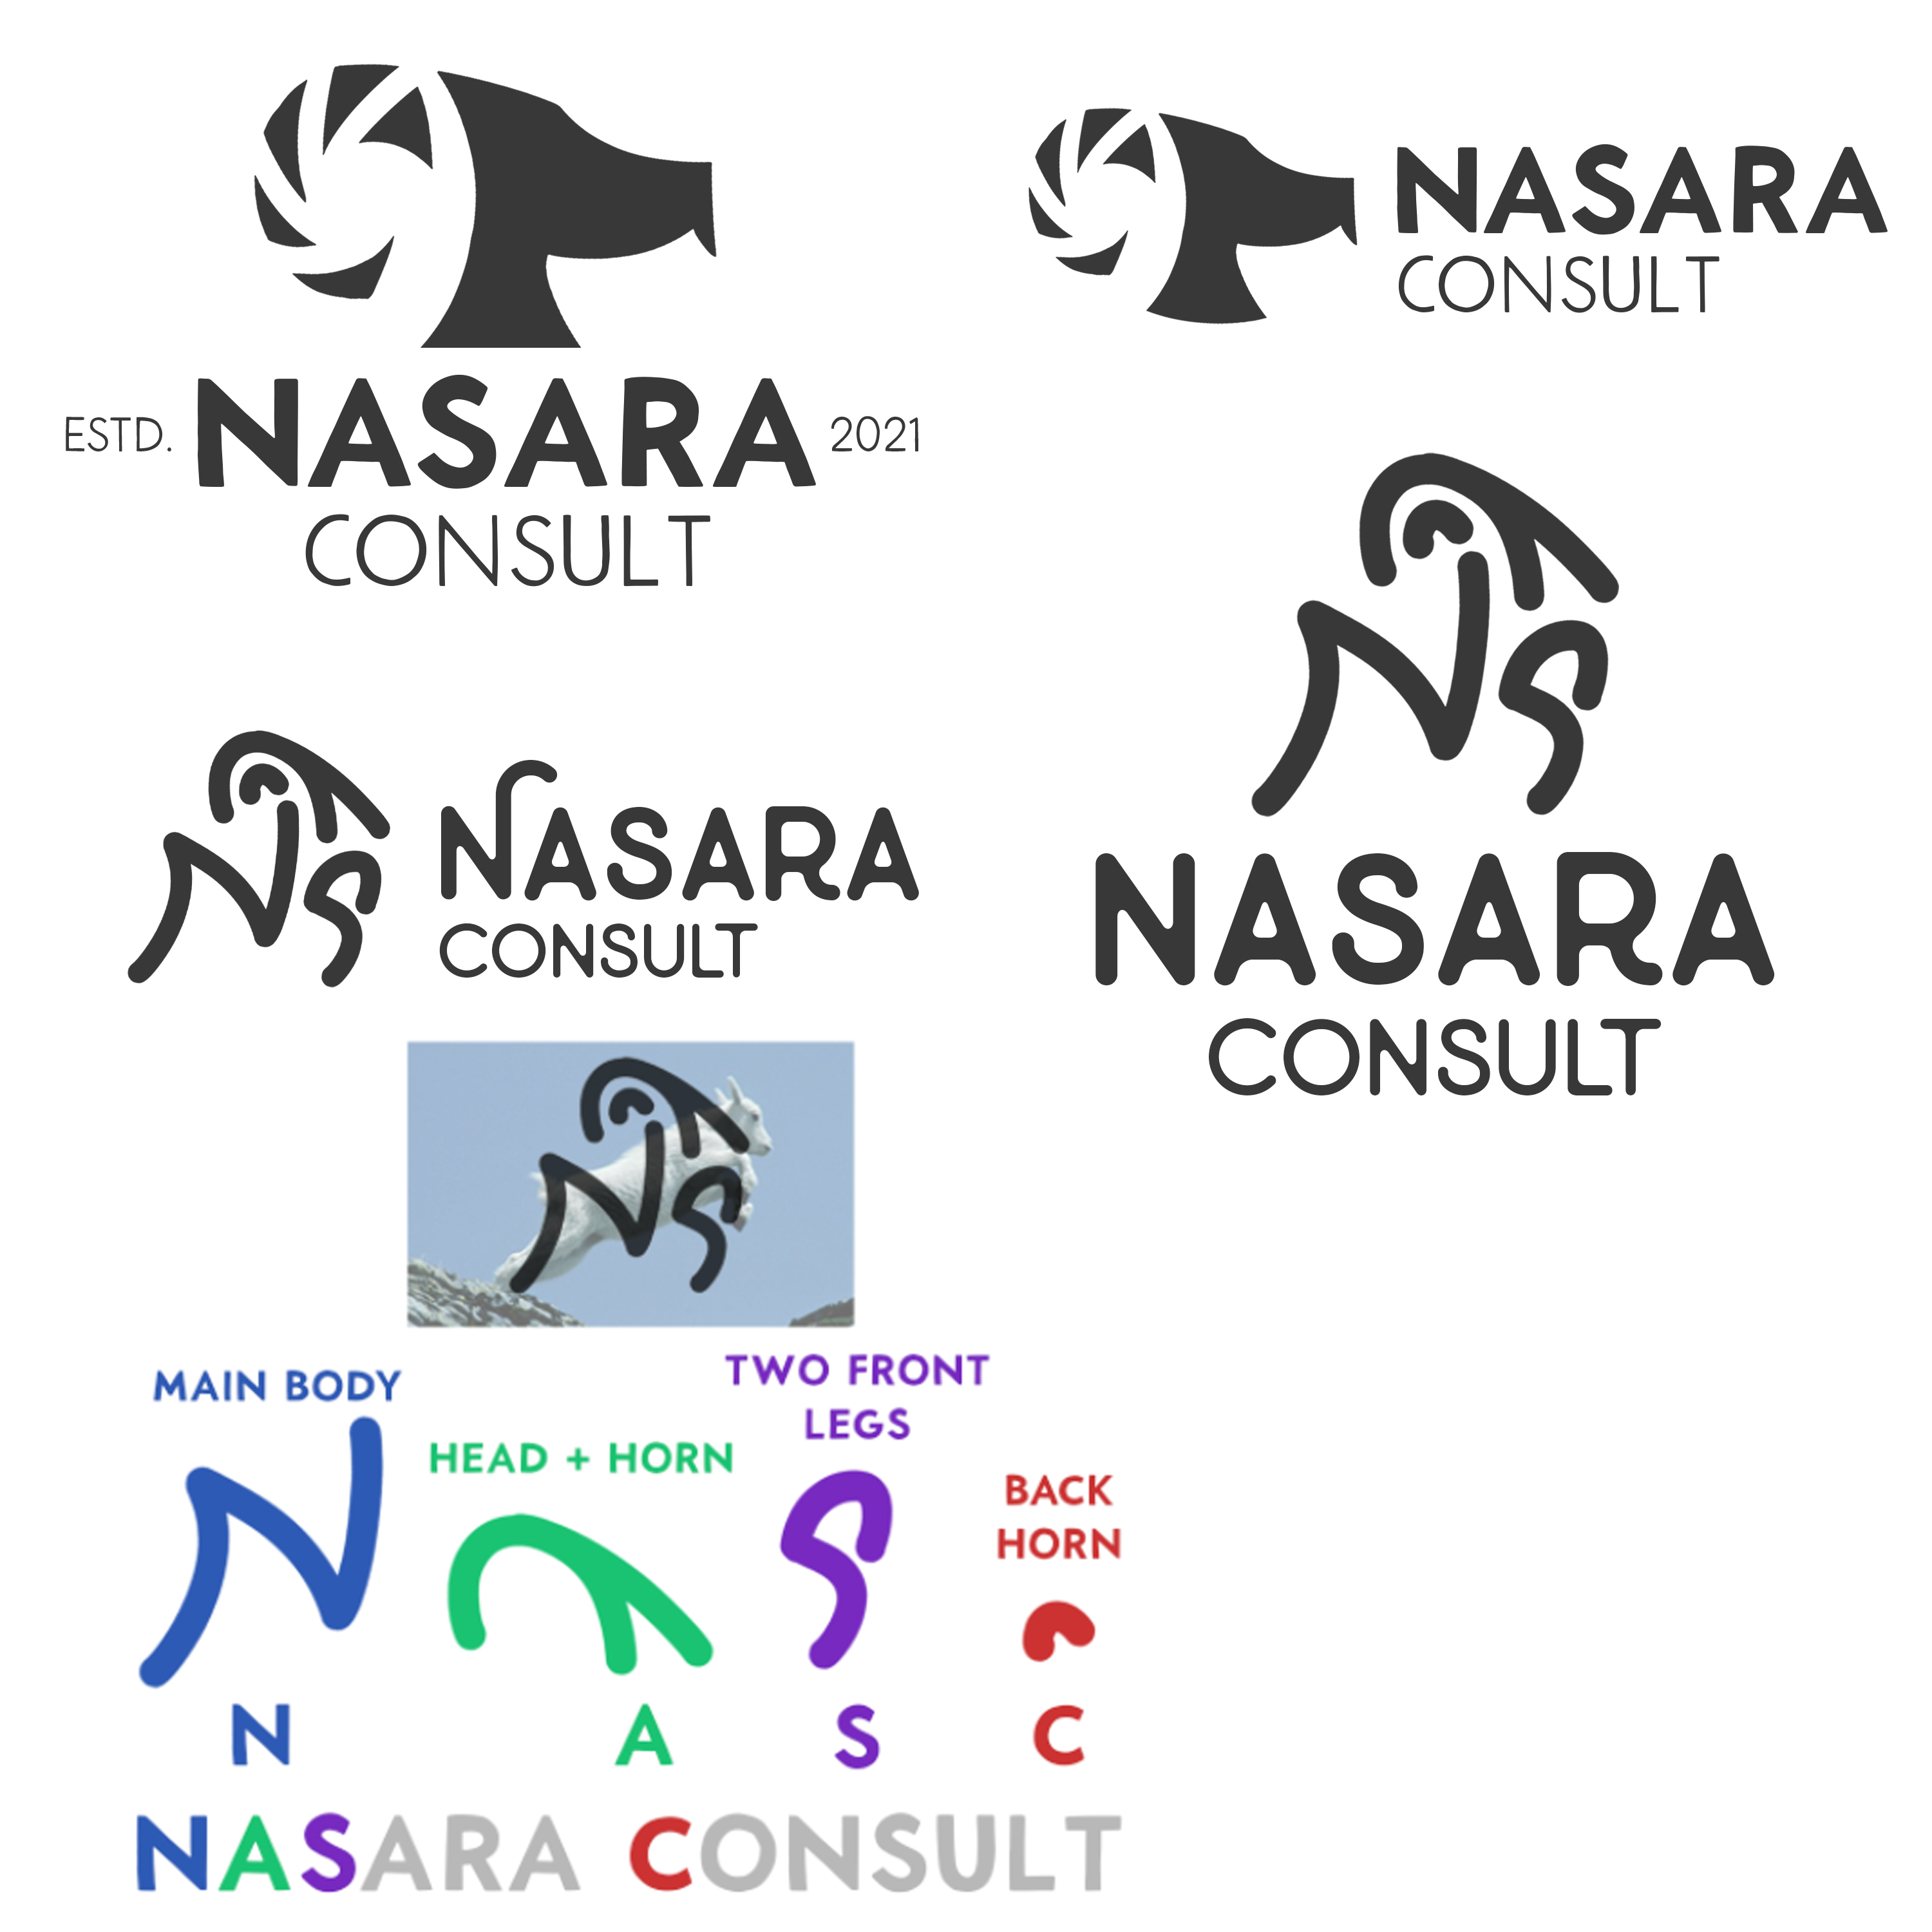 Nasara Consult different concepts and ideas